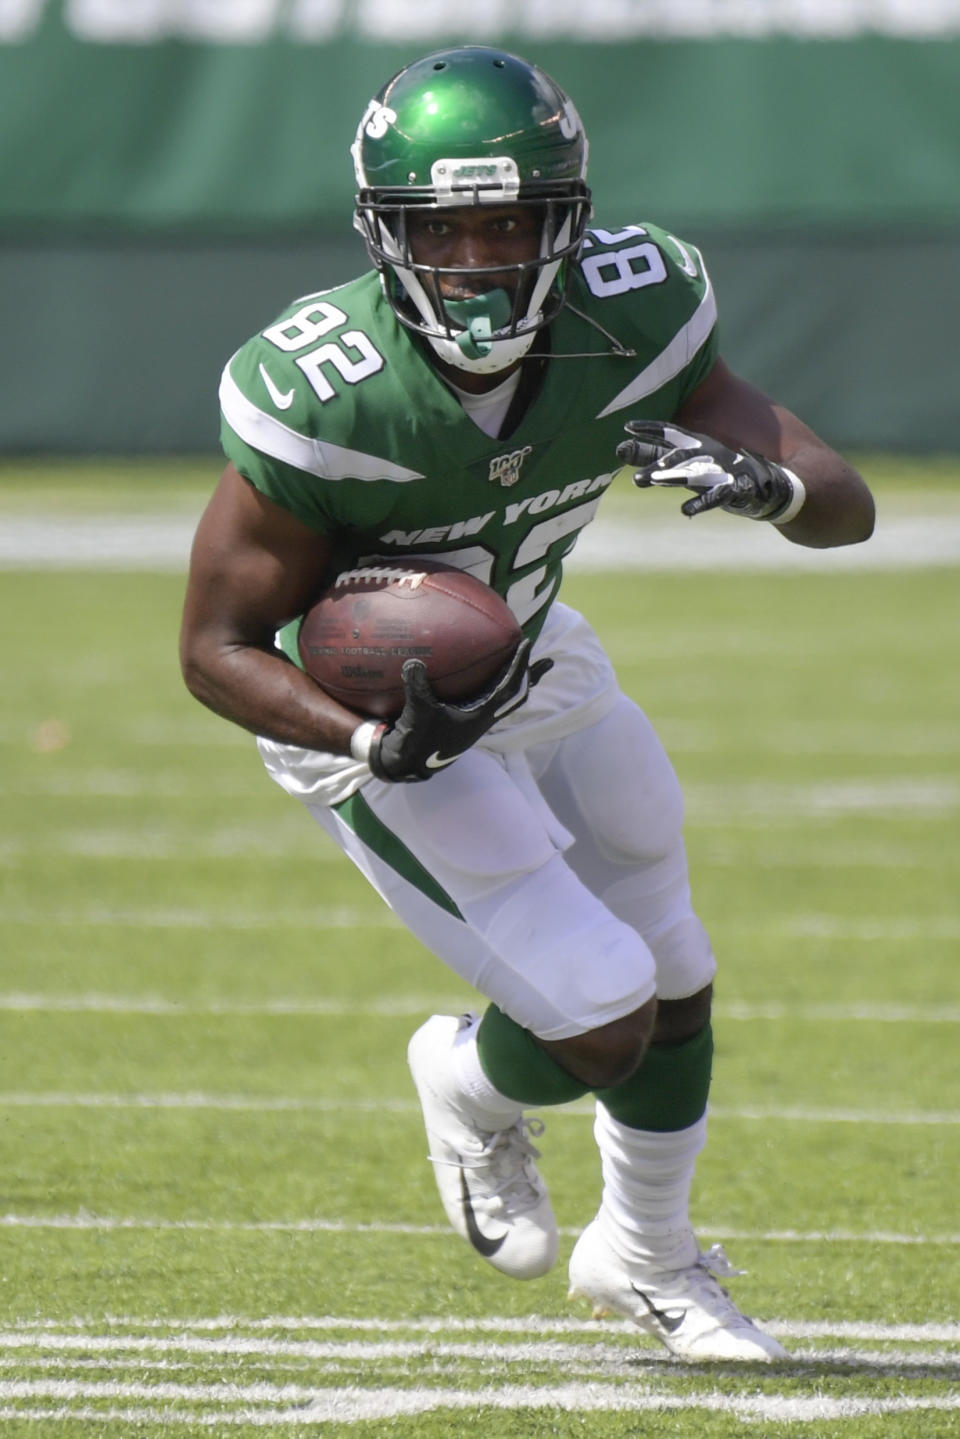 New York Jets' Jamison Crowder (82) runs after a catch during the first half of an NFL football game against the Buffalo Bills Sunday, Sept. 8, 2019, in East Rutherford, N.J. (AP Photo/Bill Kostroun)